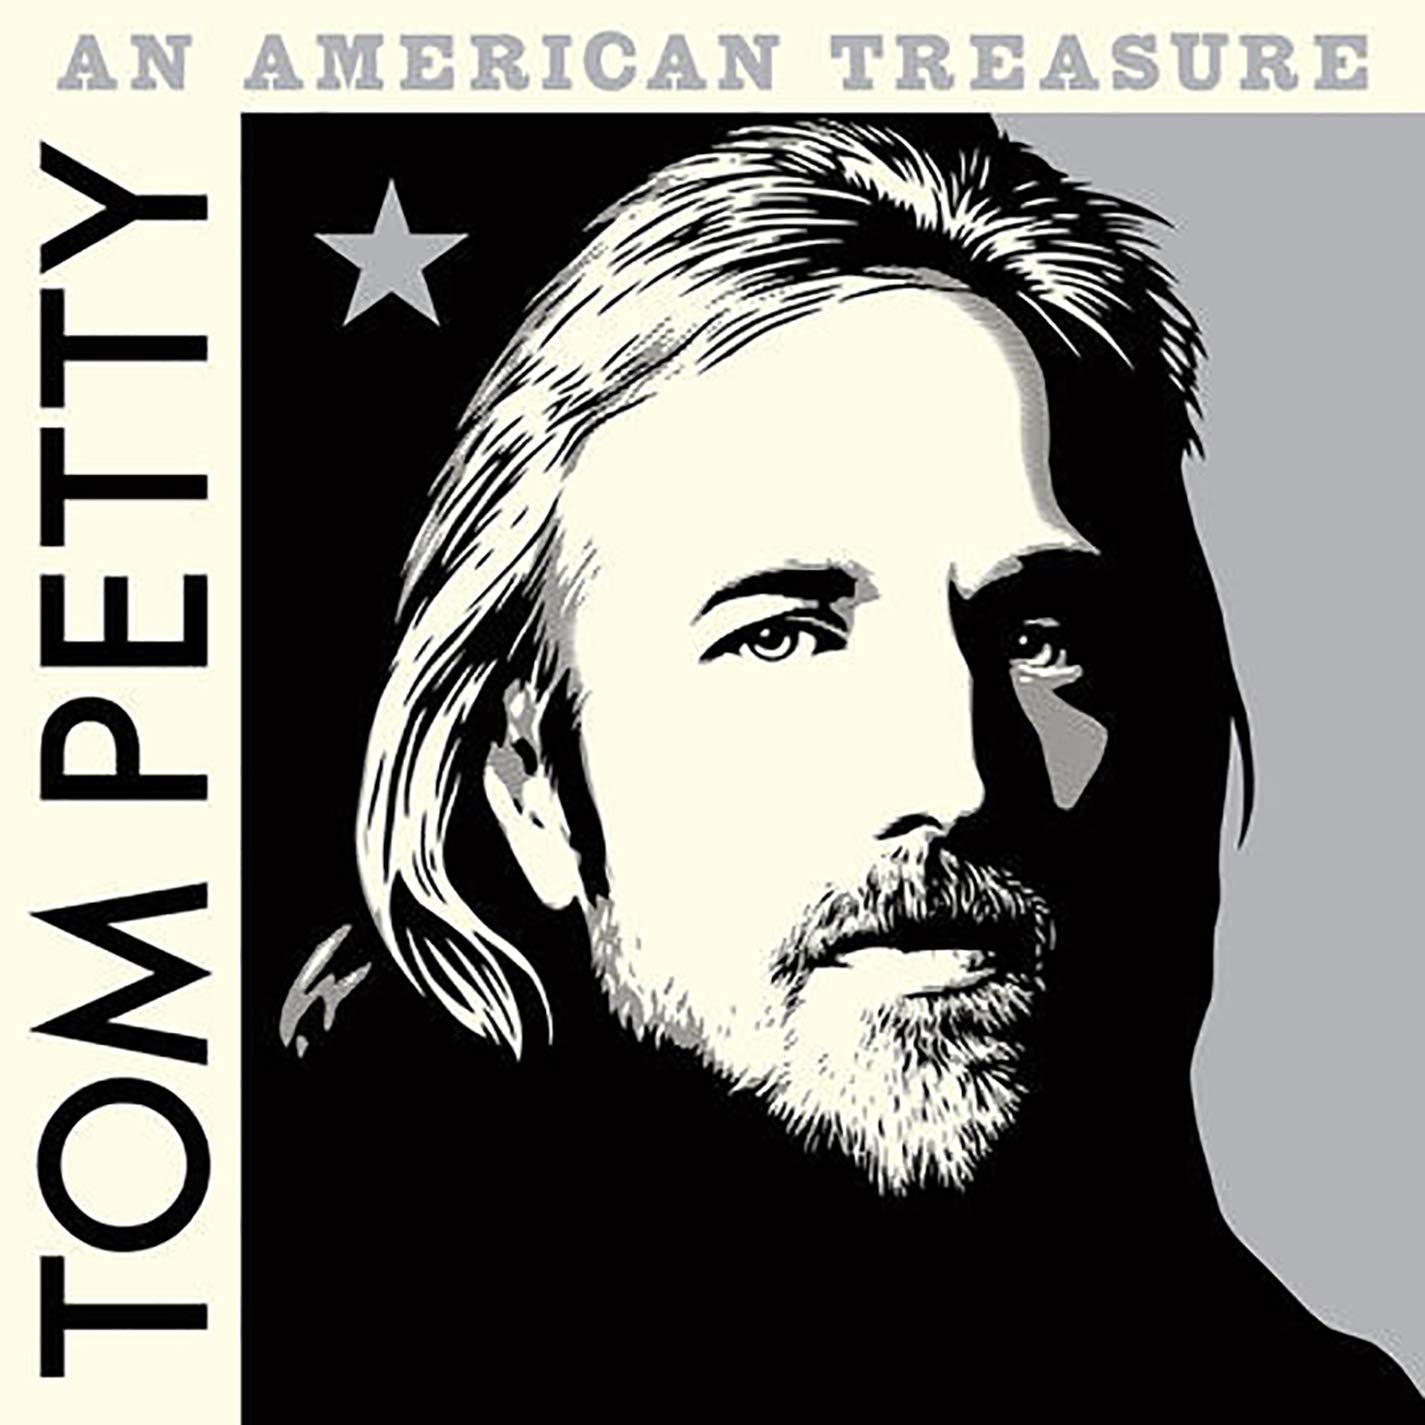 tom petty torrent discography flac